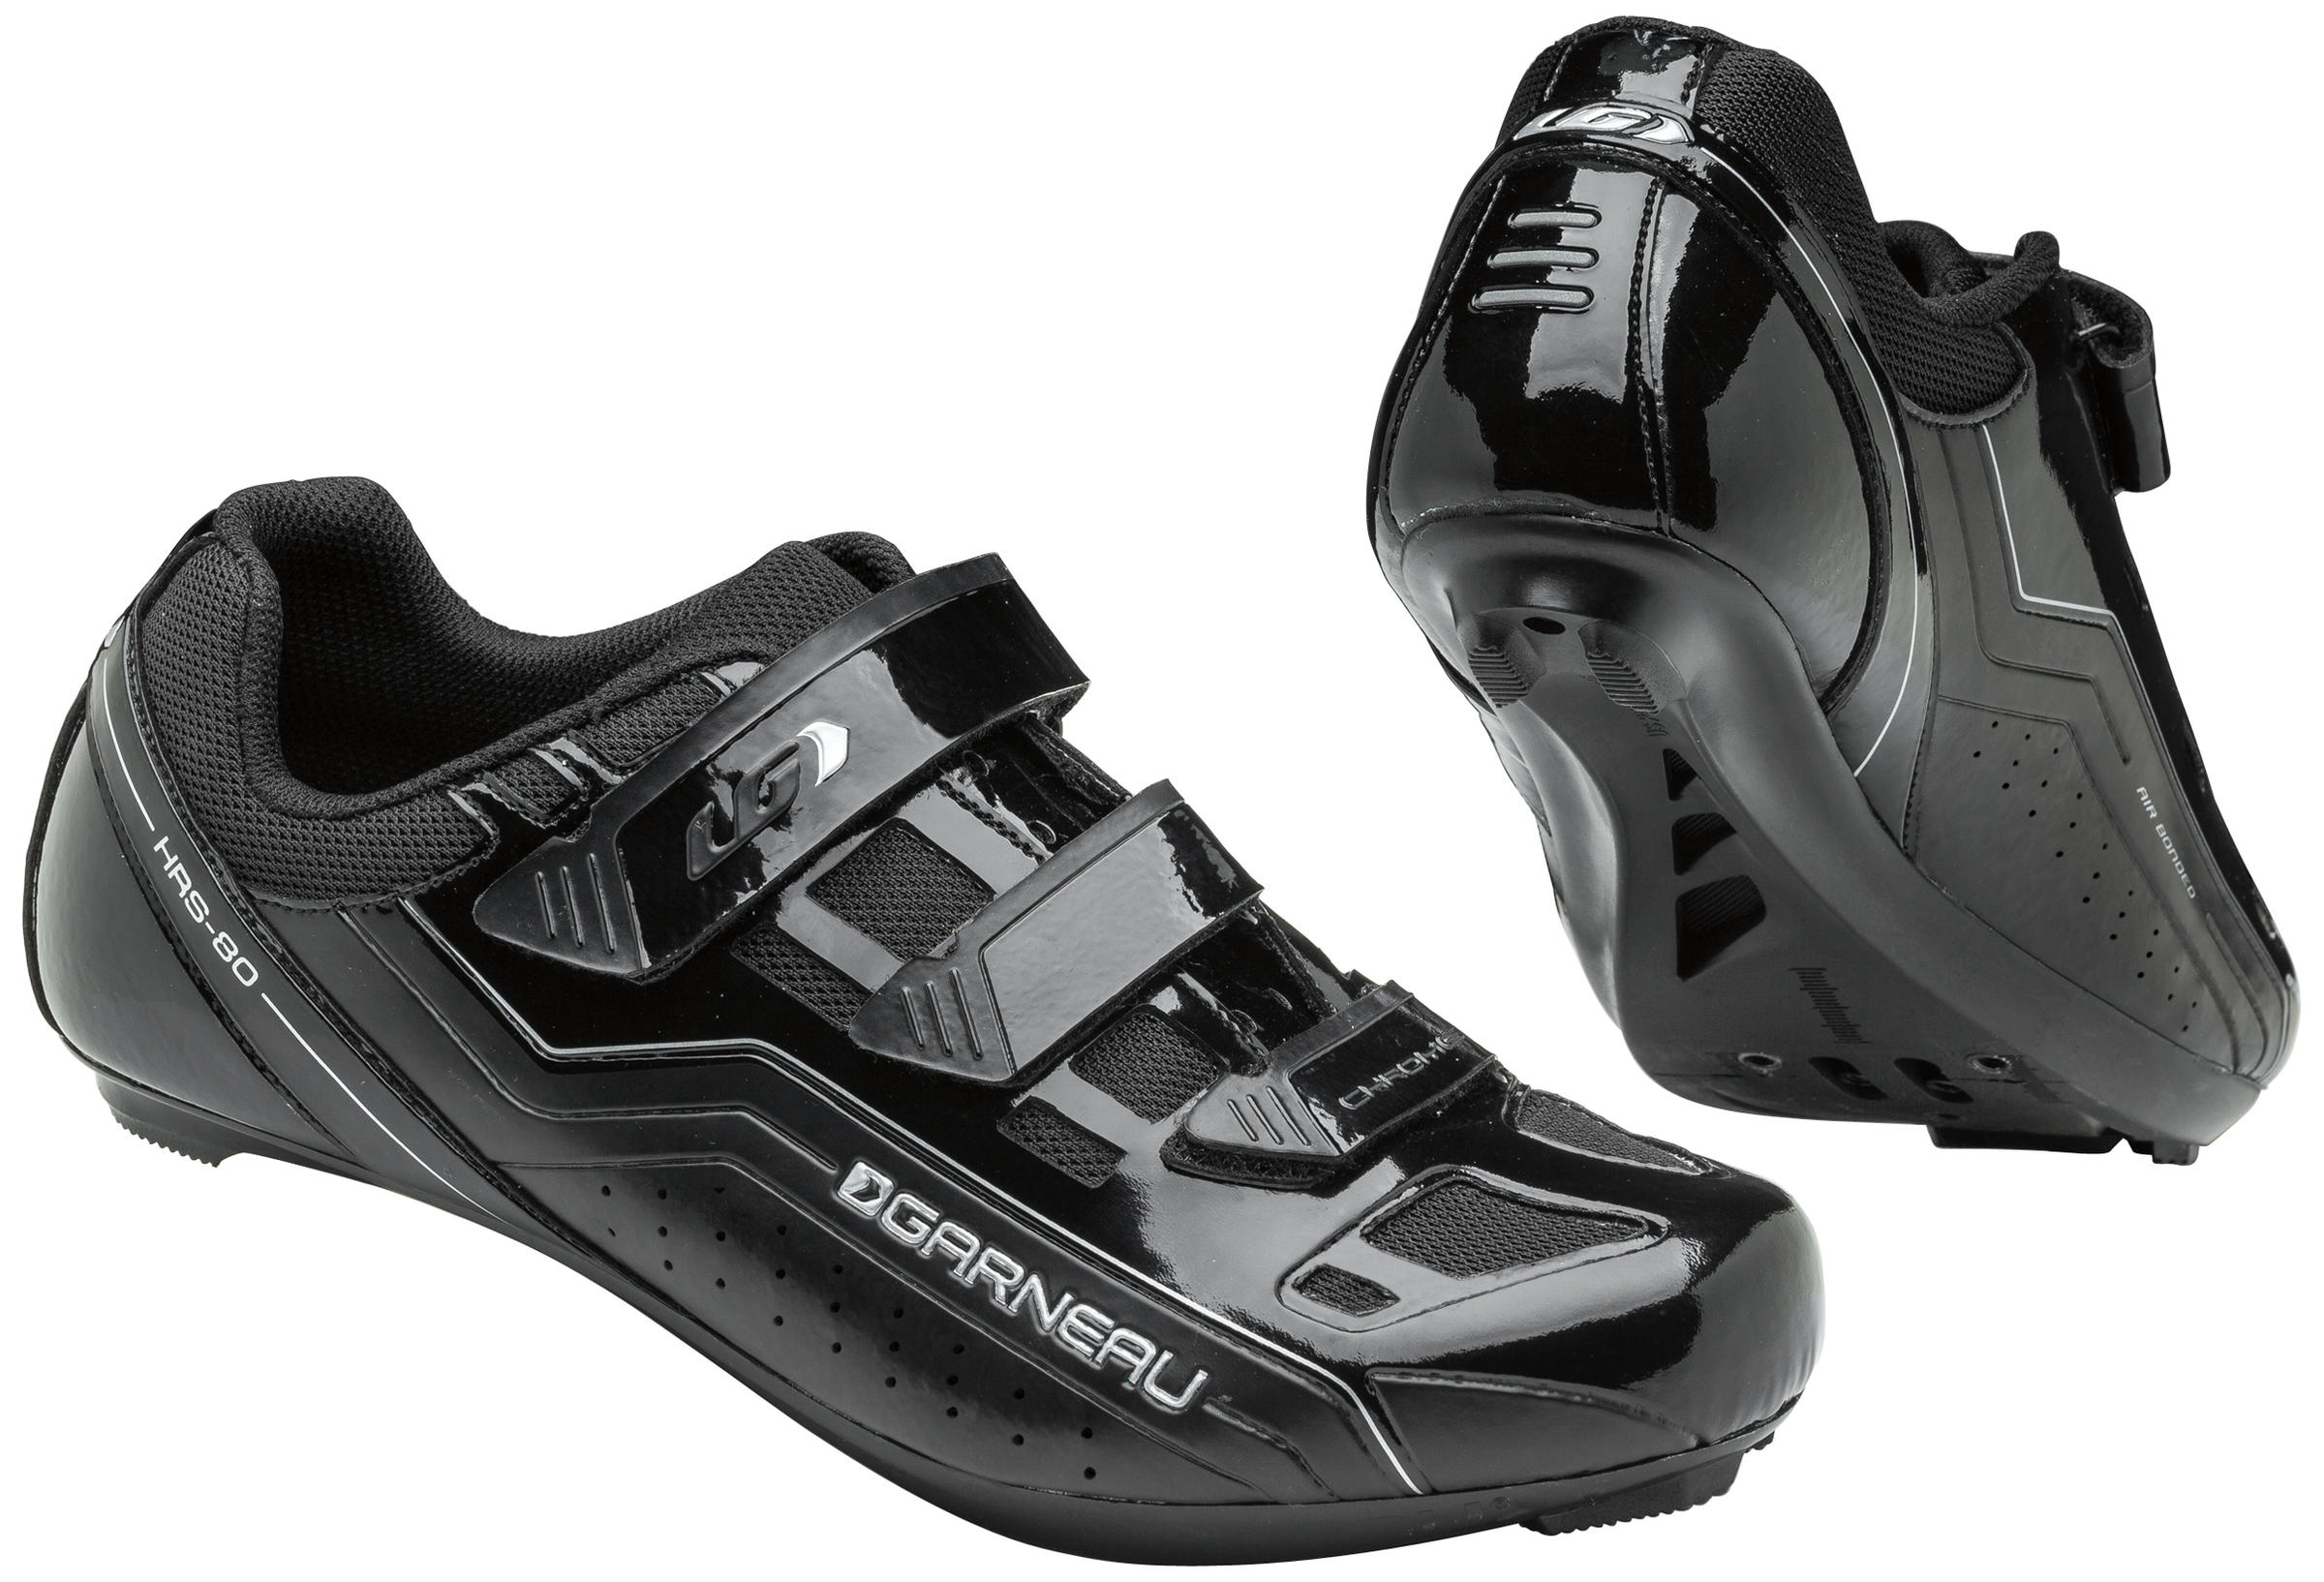 Garneau Chrome Cycling Shoes - Scott's Cycle and Sports